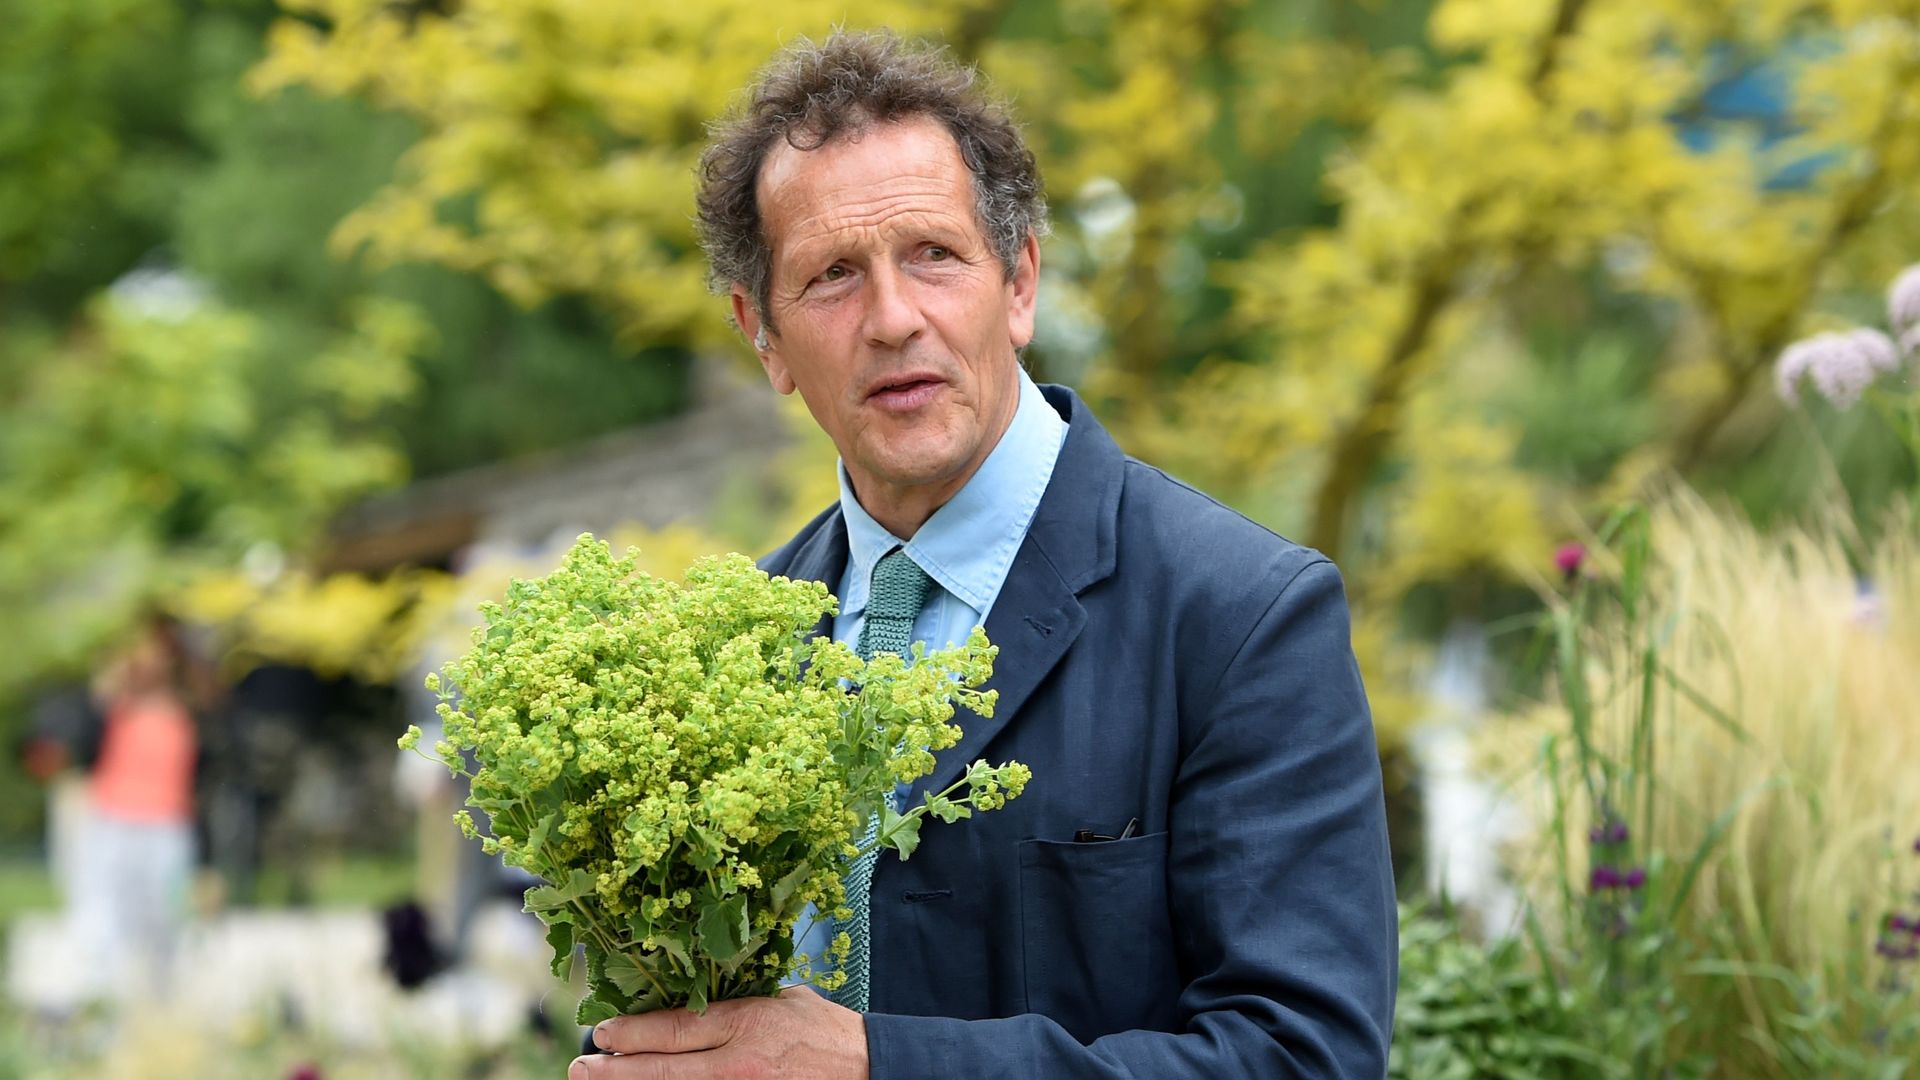 Monty Don at Chelsea Flower Show, London, United Kingdom - 21 May 2018